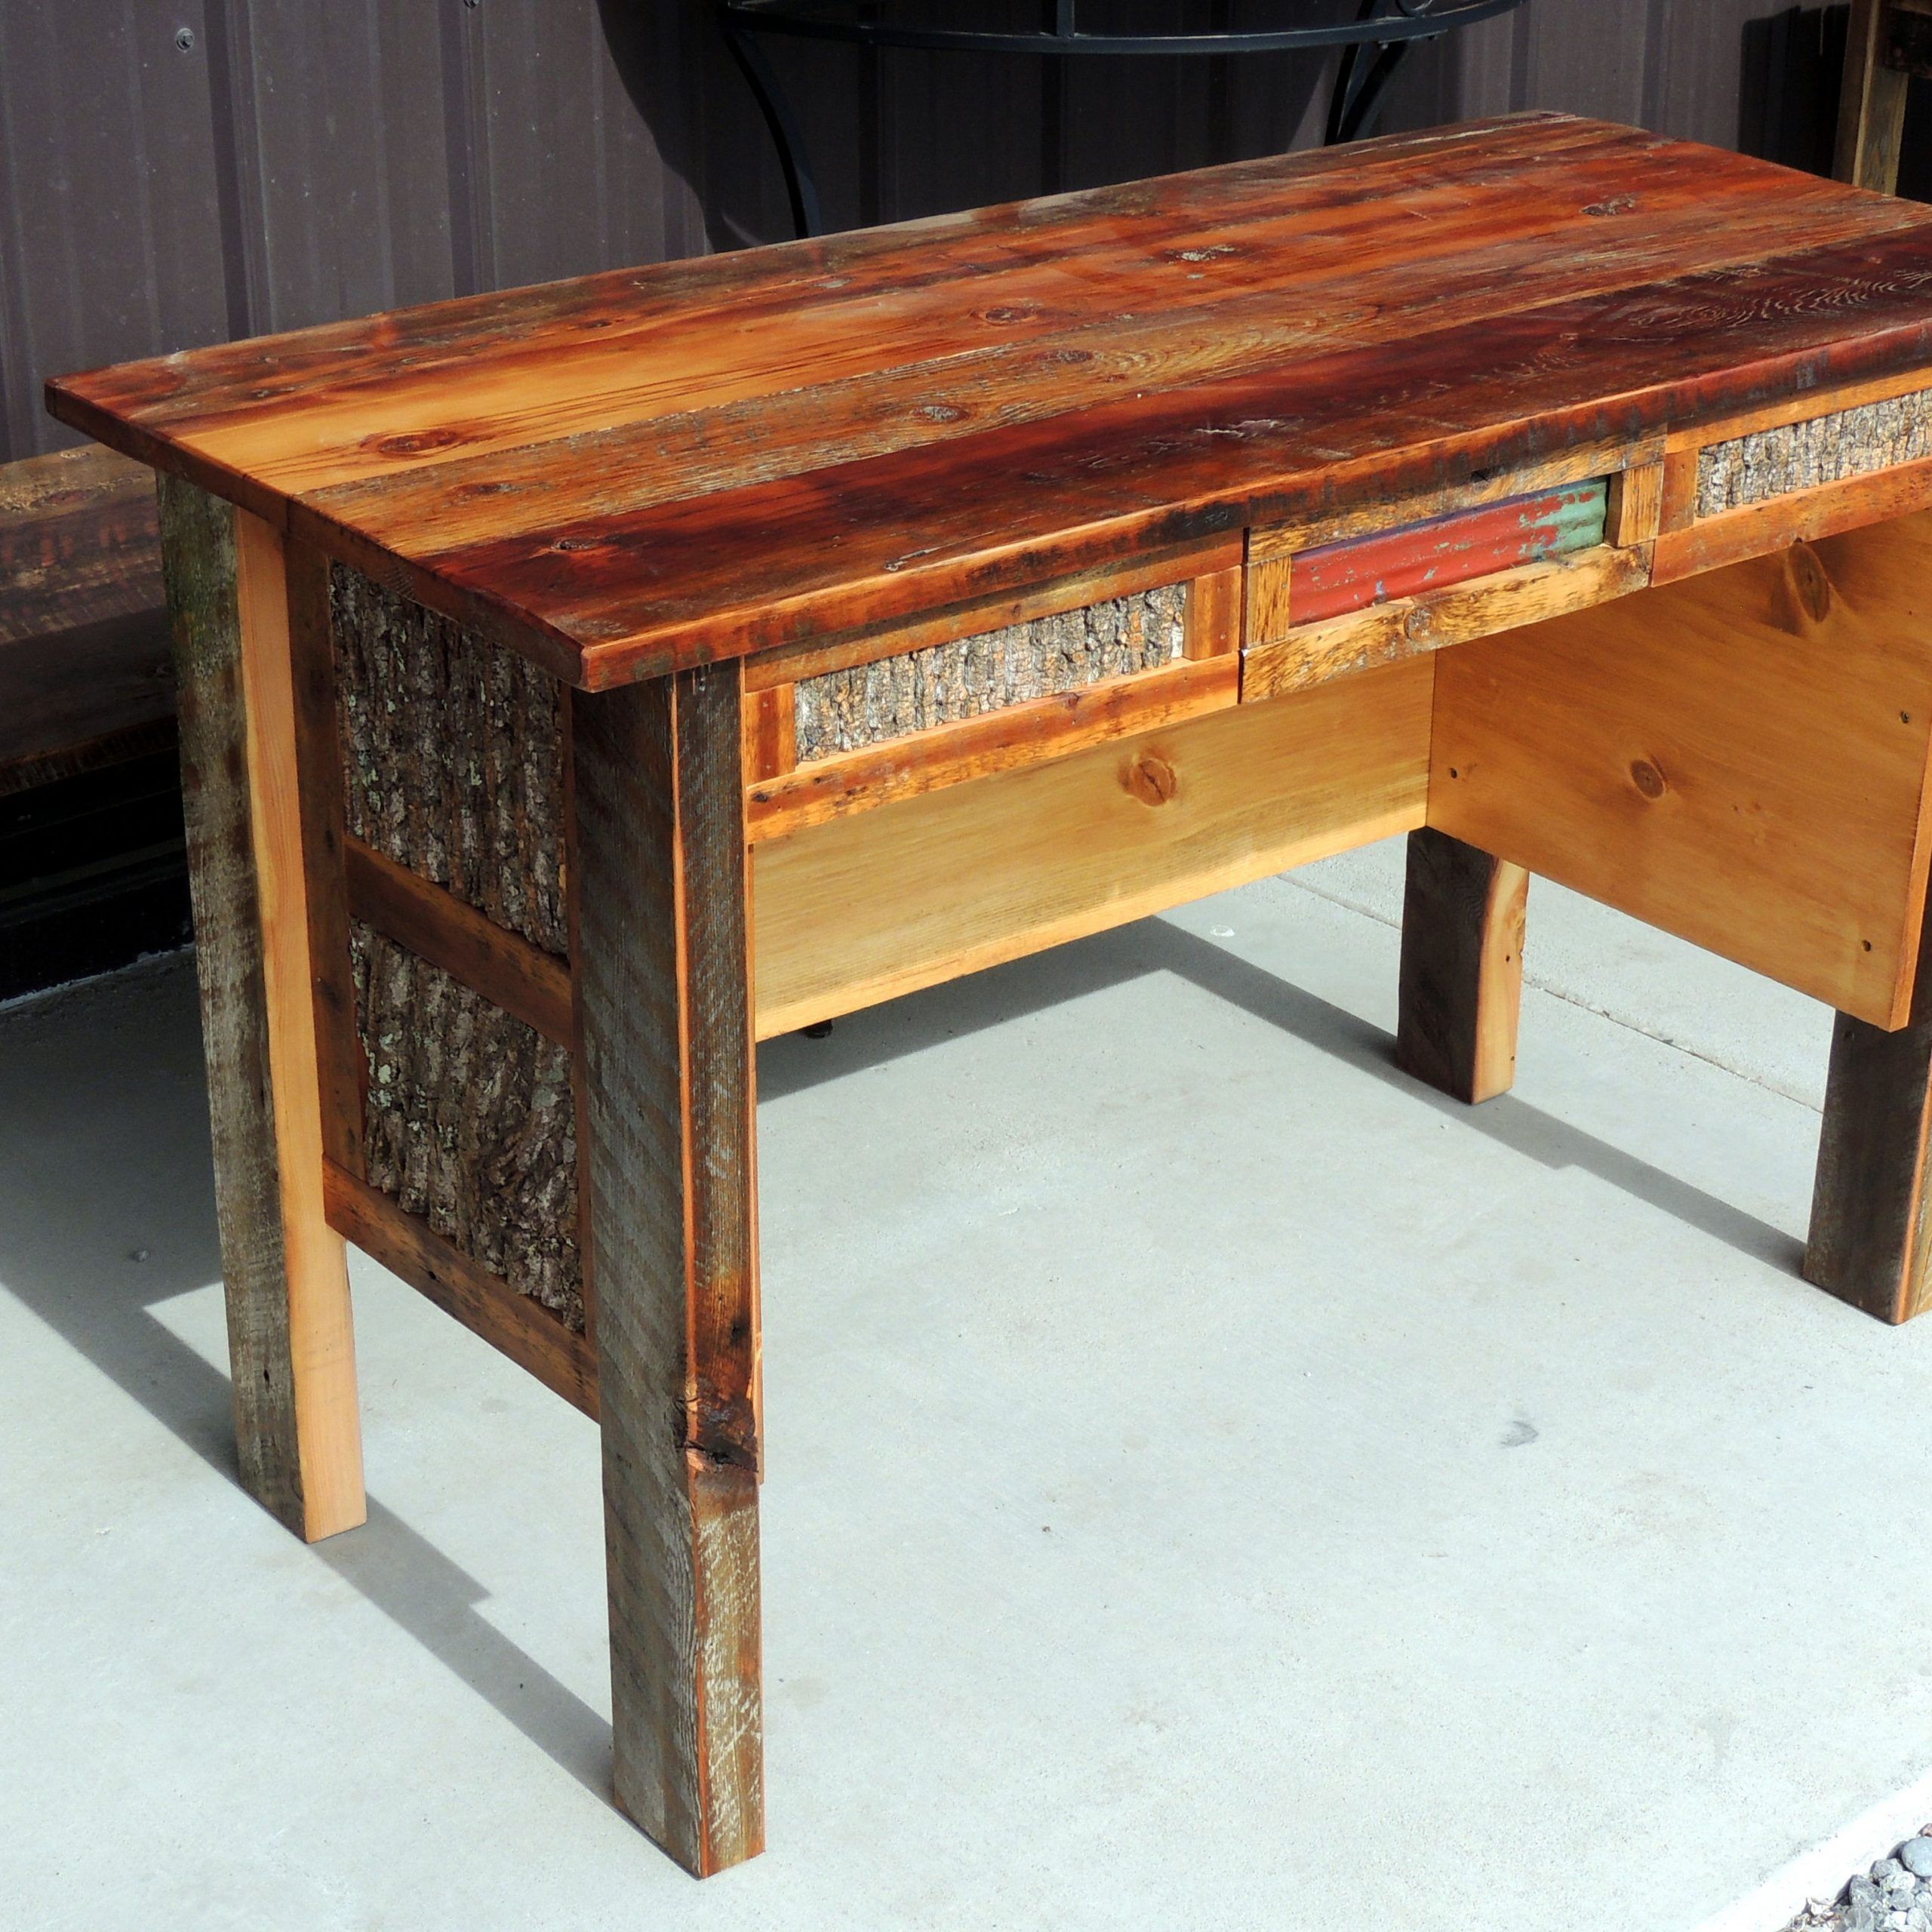 Rustic Barnwood Writing Desk With Red Tin In Drawer And Bark Inset On Regarding Rustic Acacia Wooden Writing Desks (View 1 of 15)